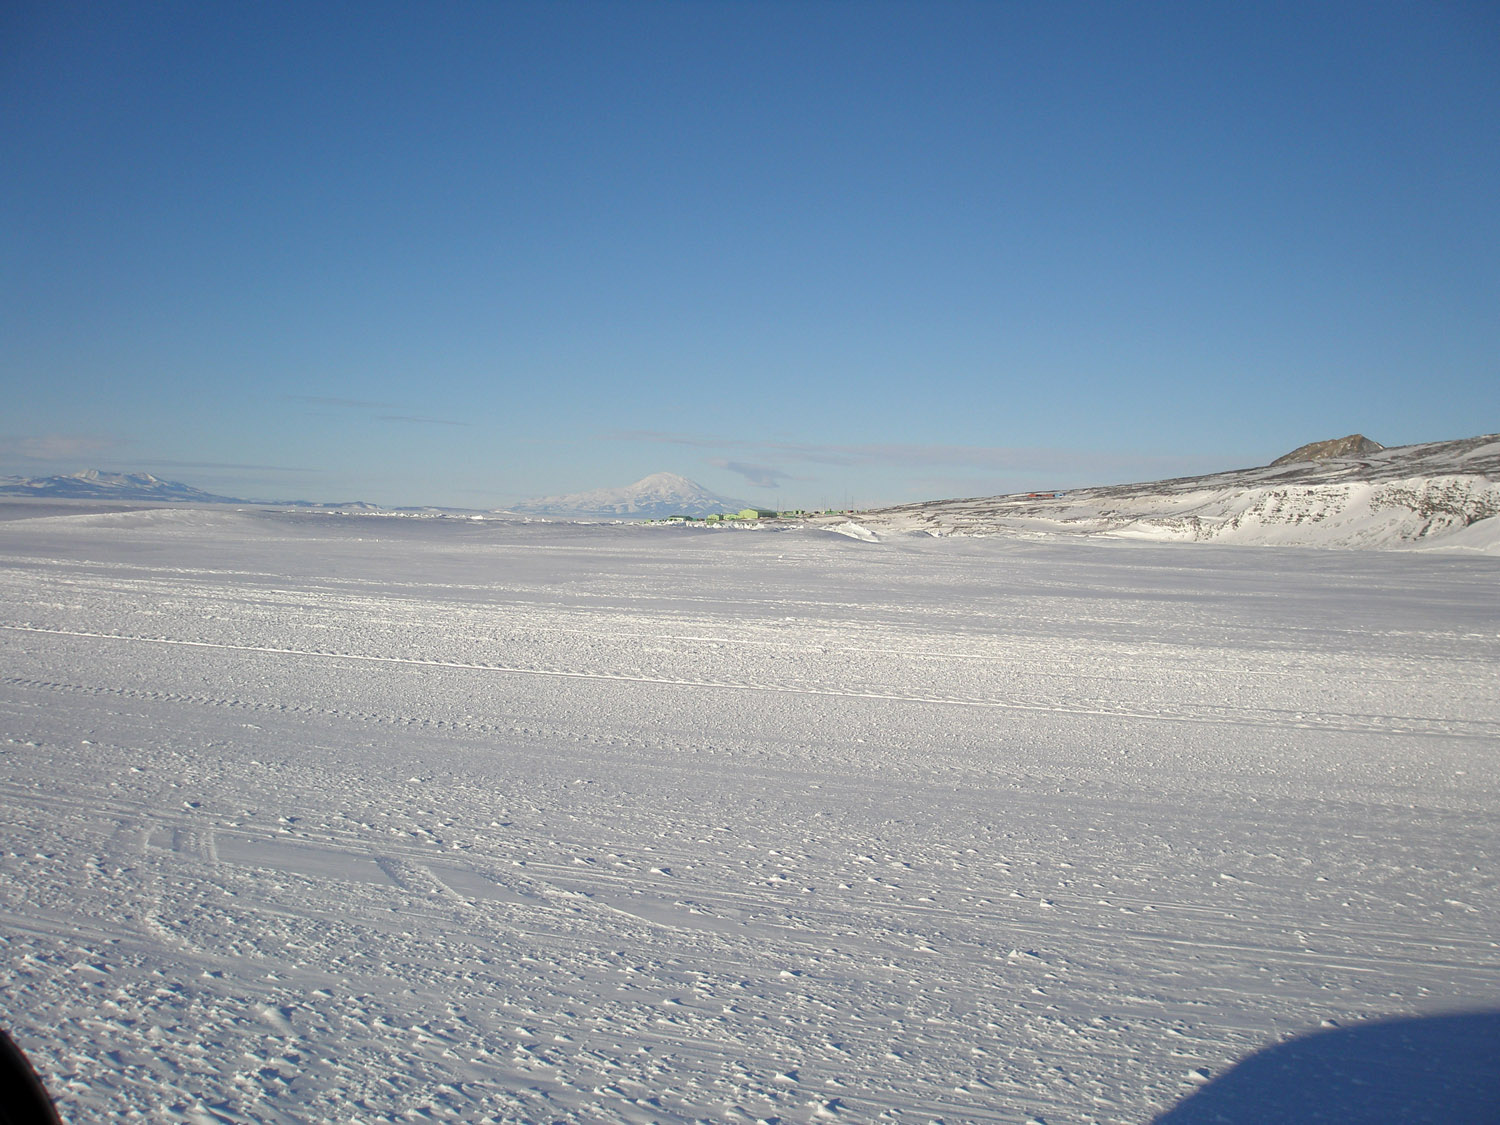 On the road to LDB (Long Duration Balloon project) on the Ross Ice Shelf